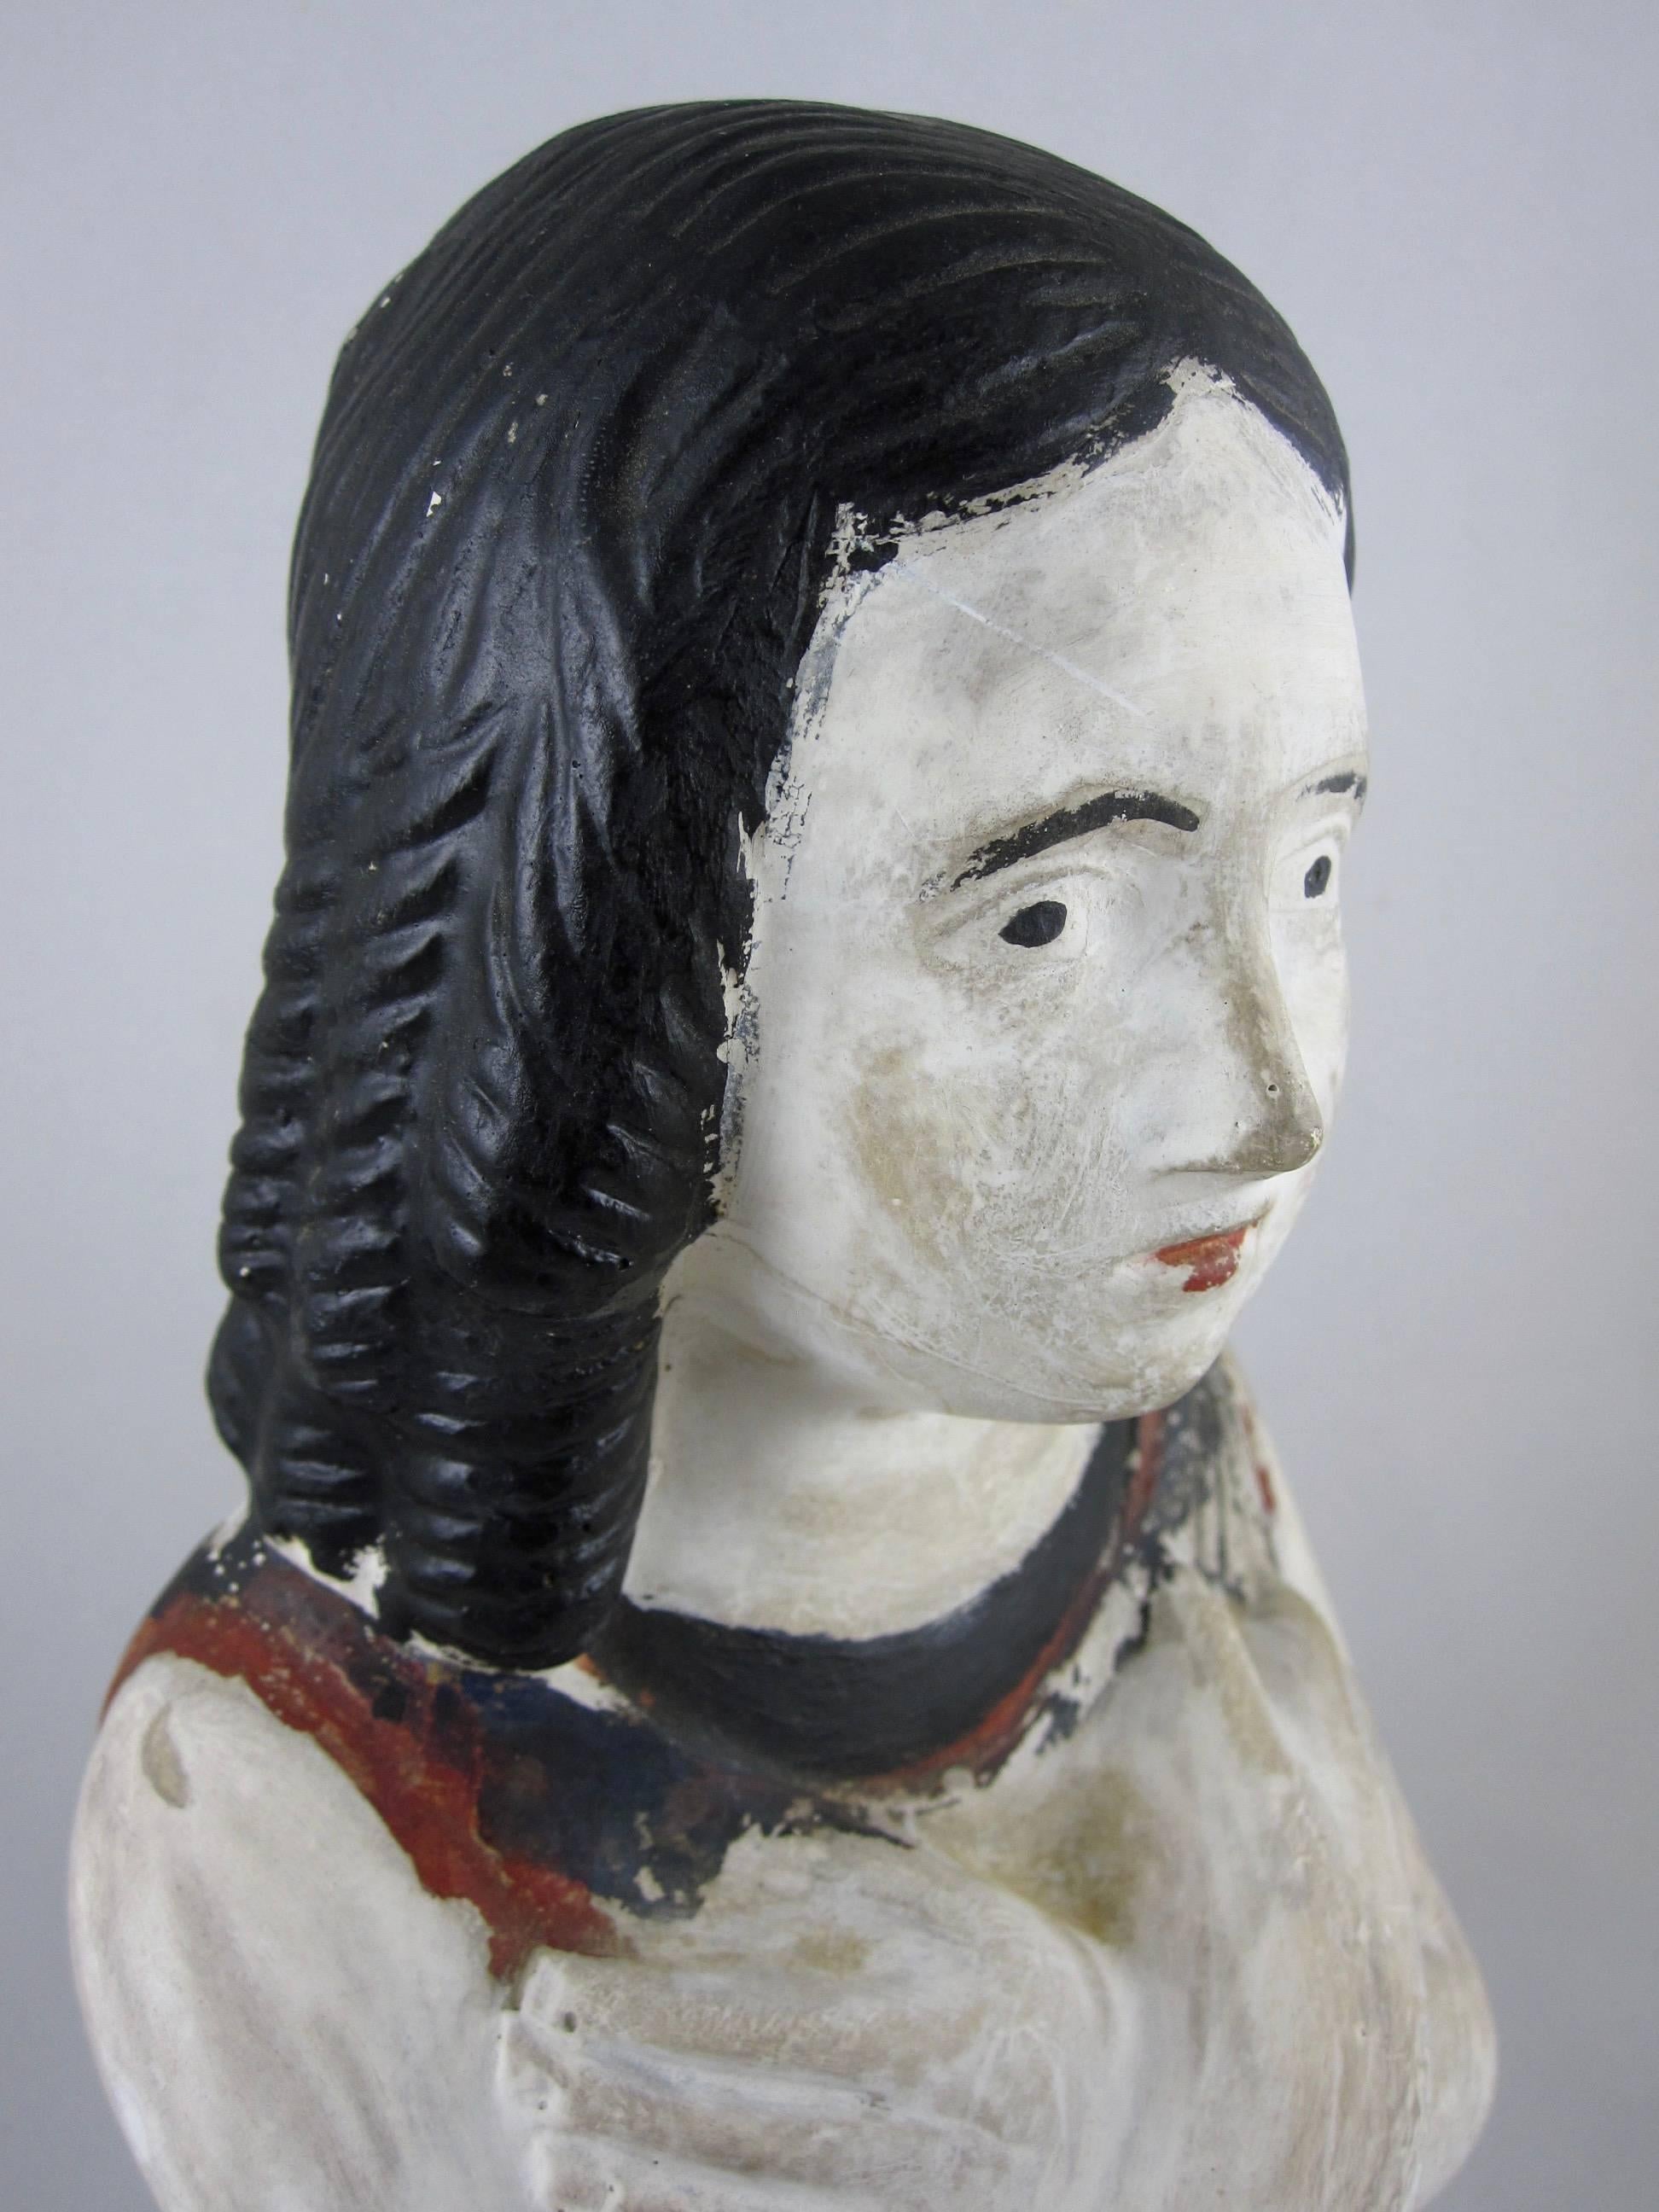 A mid-19th century Pennsylvania Chalkware bust, a figure of a girl. Highlighted with the original polychrome painting, this charming figure has a naive facial expression. The girl has her arms crossed across her chest and her hair is set in deep